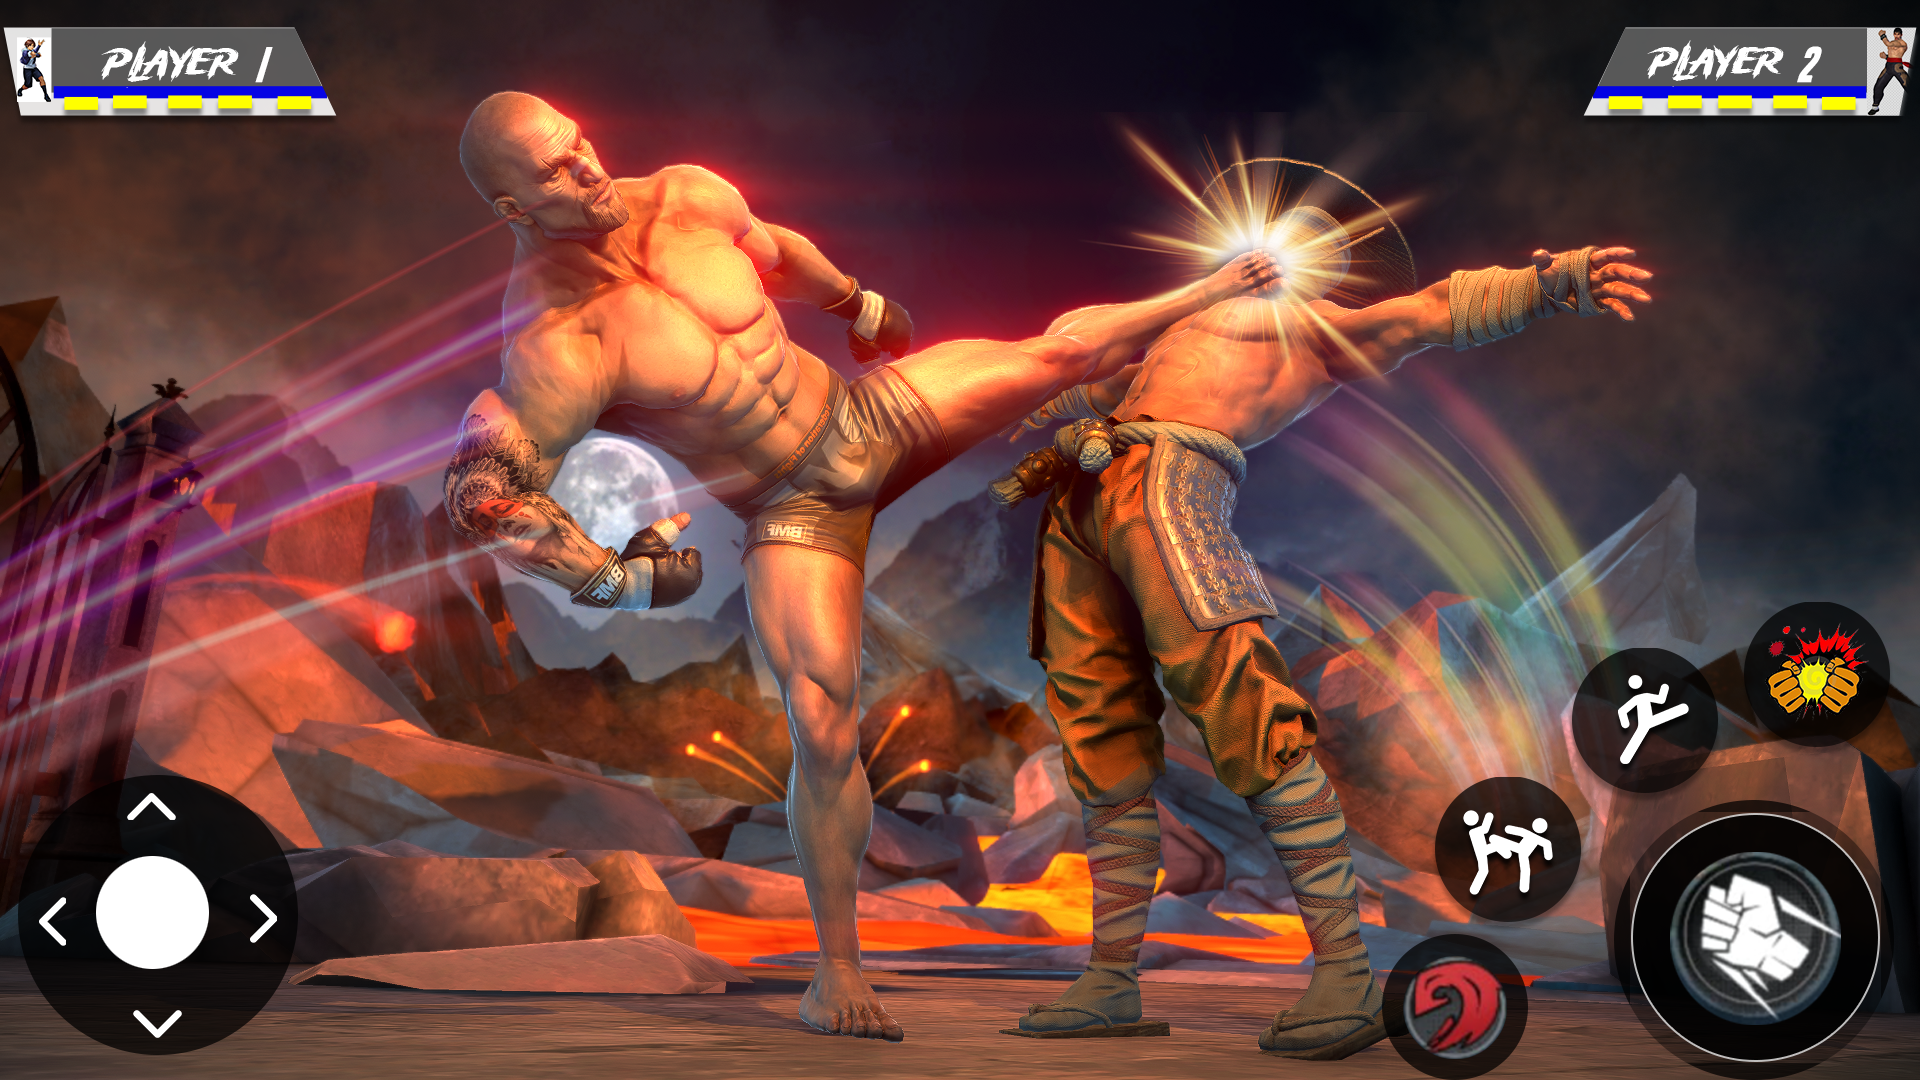 Screenshot 1 of Fighting Games Fighters Arena 1.0.3